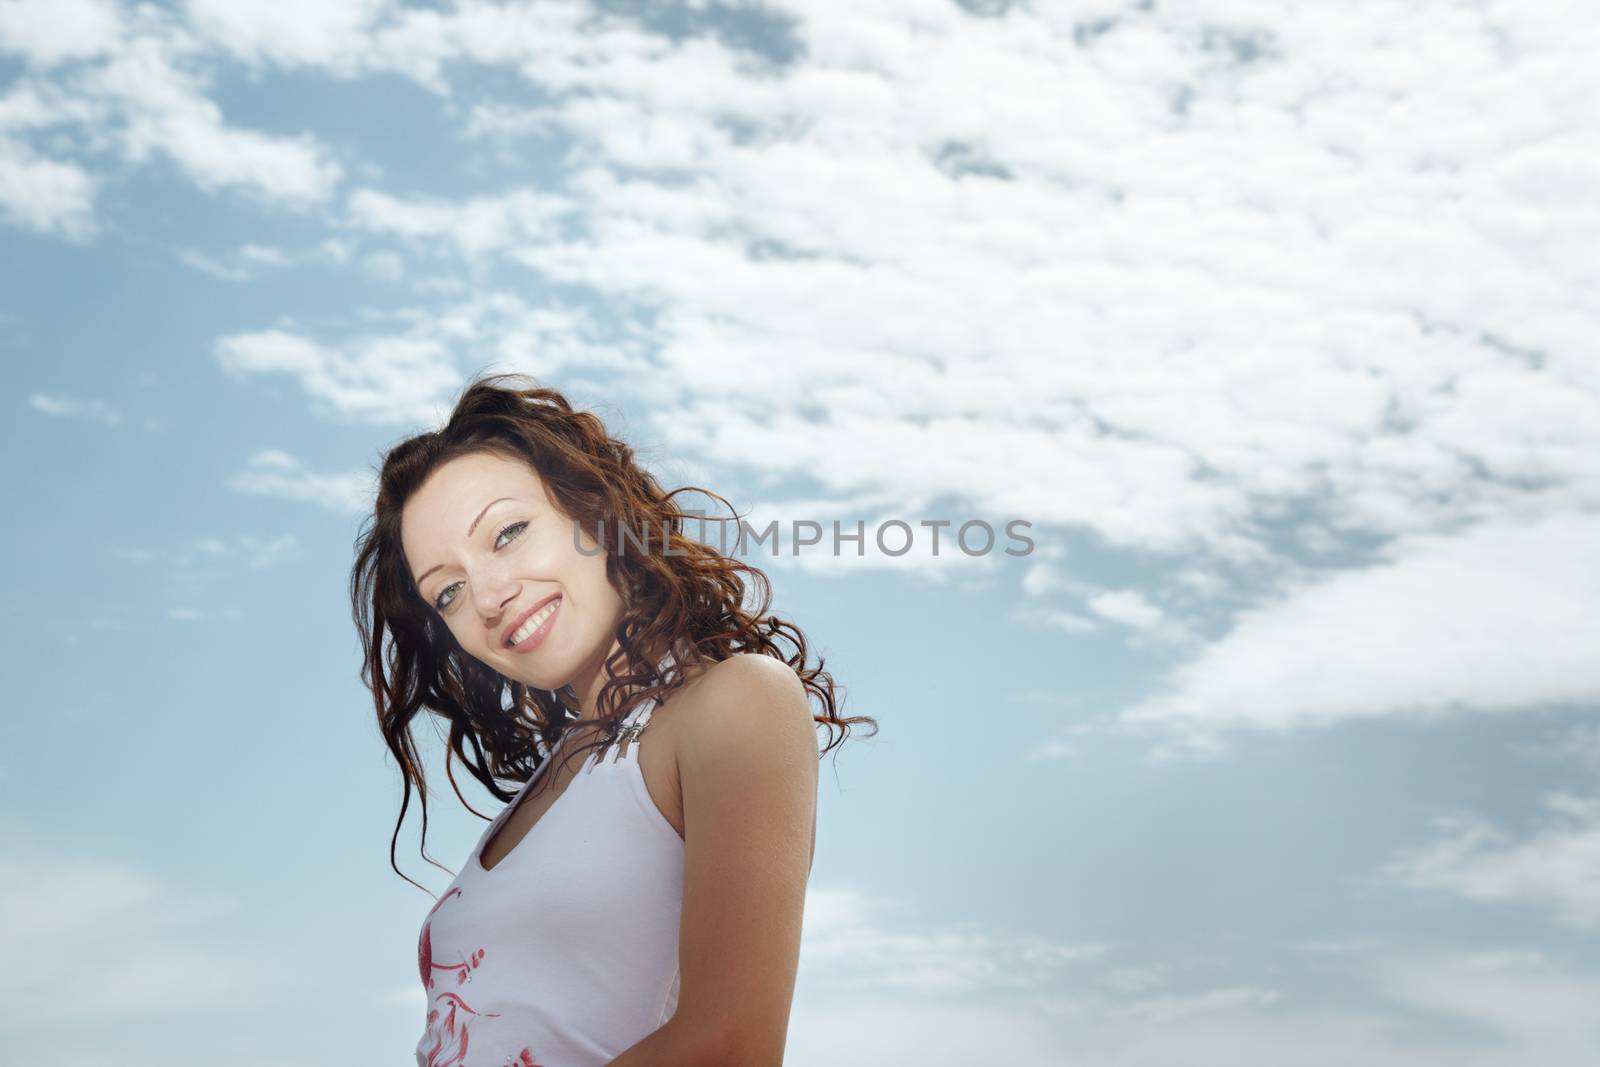 Smiling successful lady outdoors and cloudy sky on the background